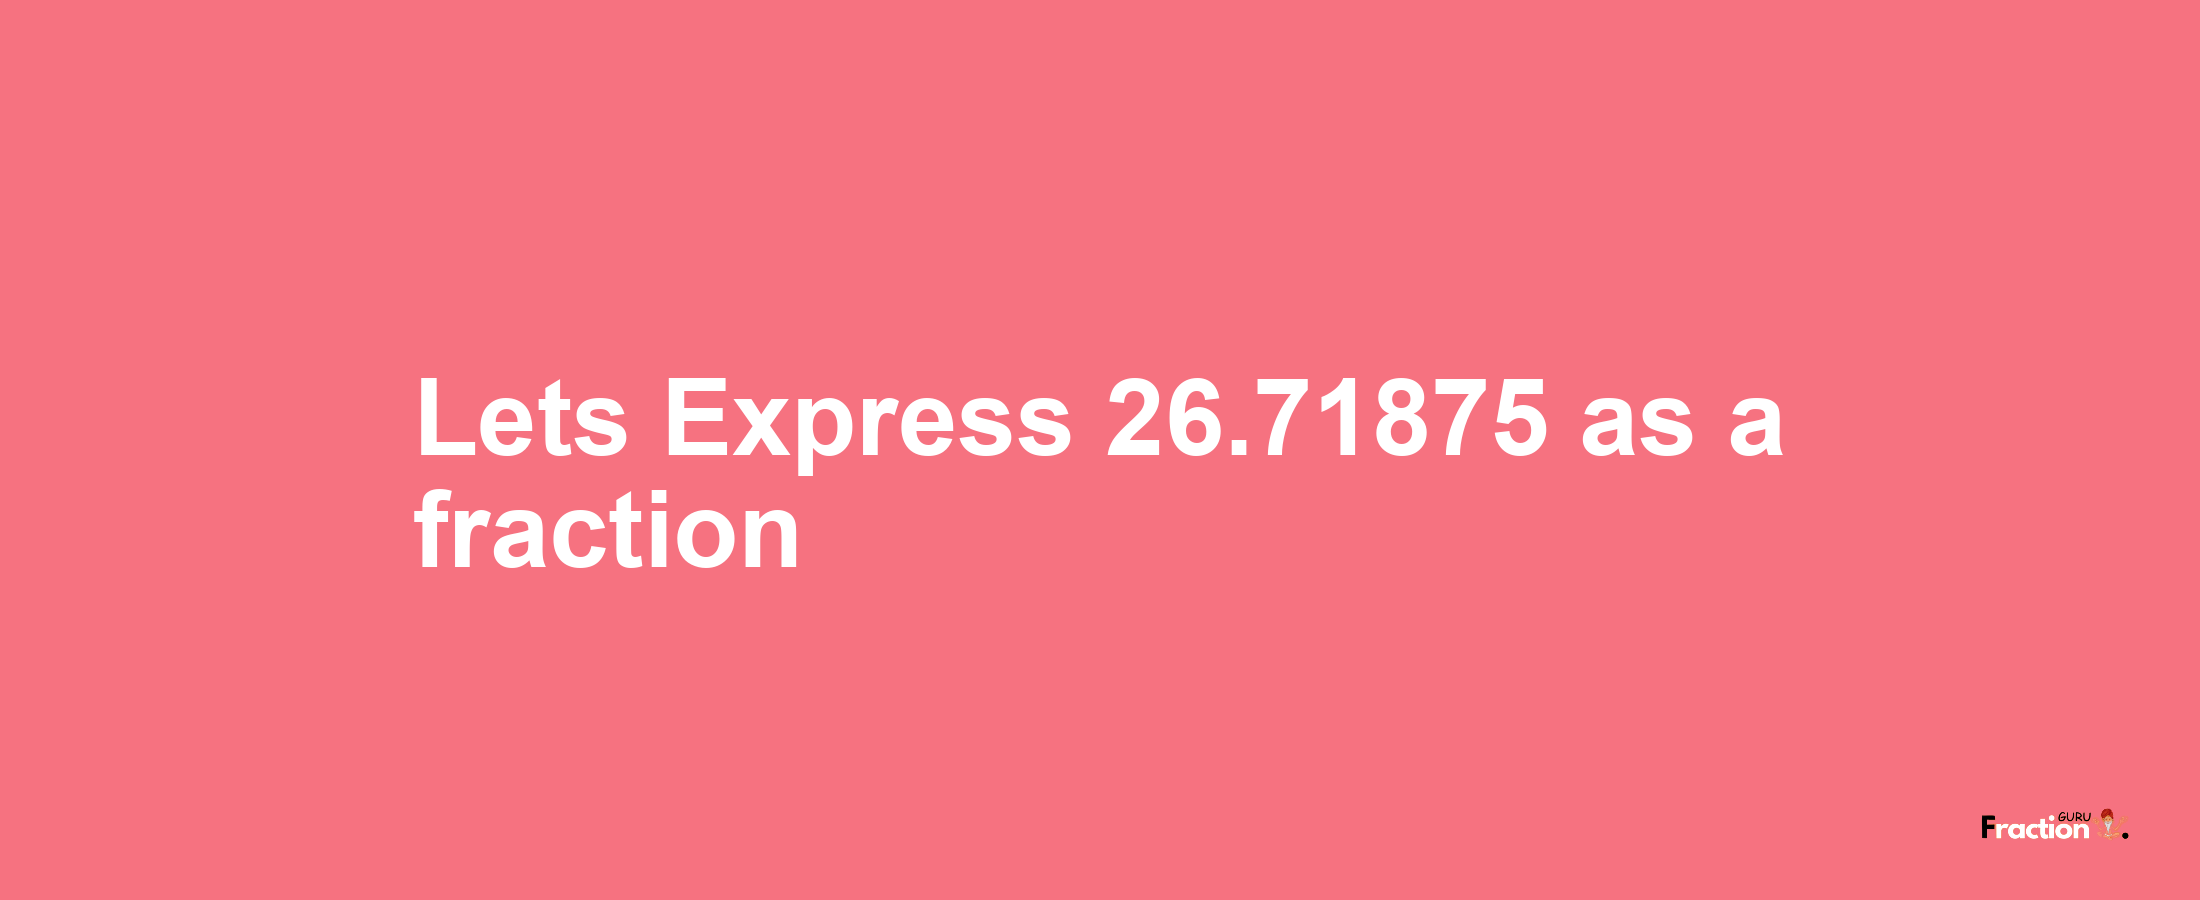 Lets Express 26.71875 as afraction